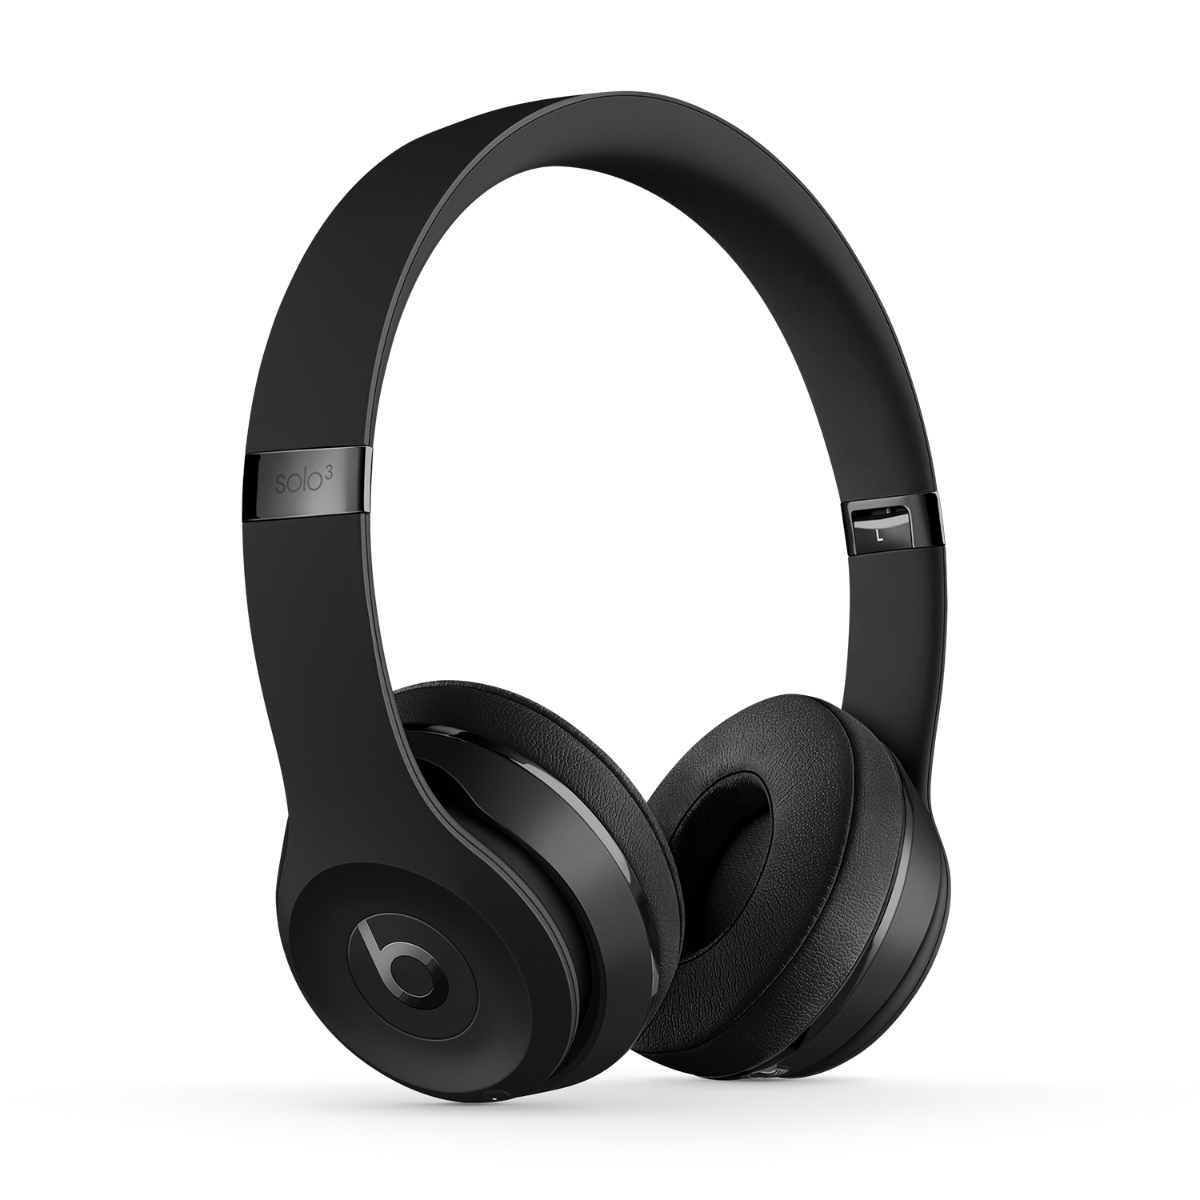 Best Beats Headphones For Working Out